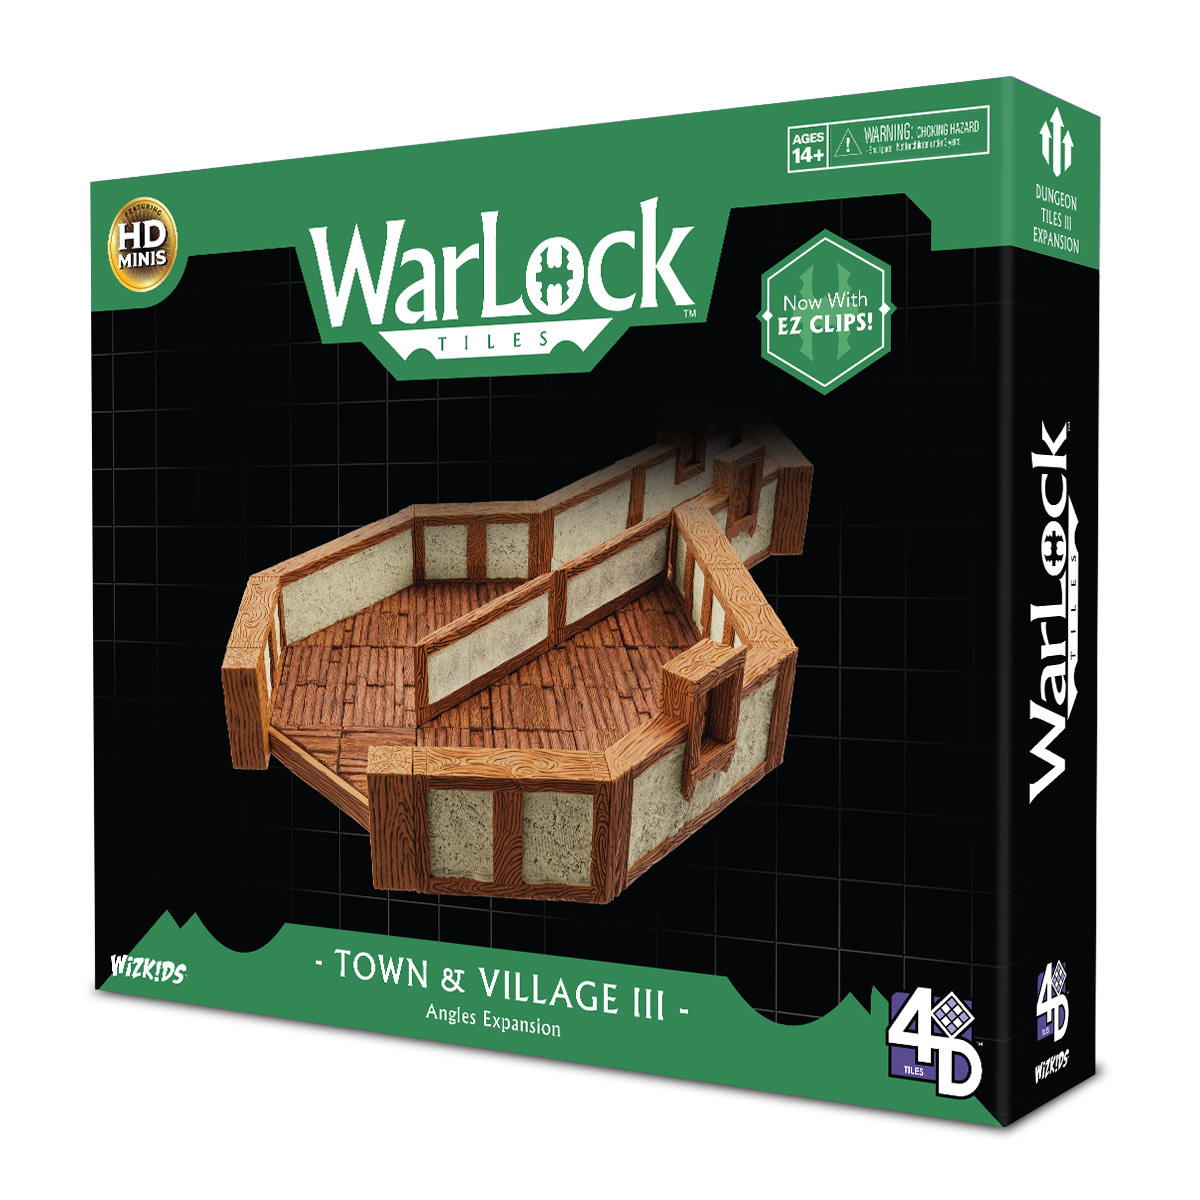 WarLock Tiles: Accessory -  Town/Village Angles